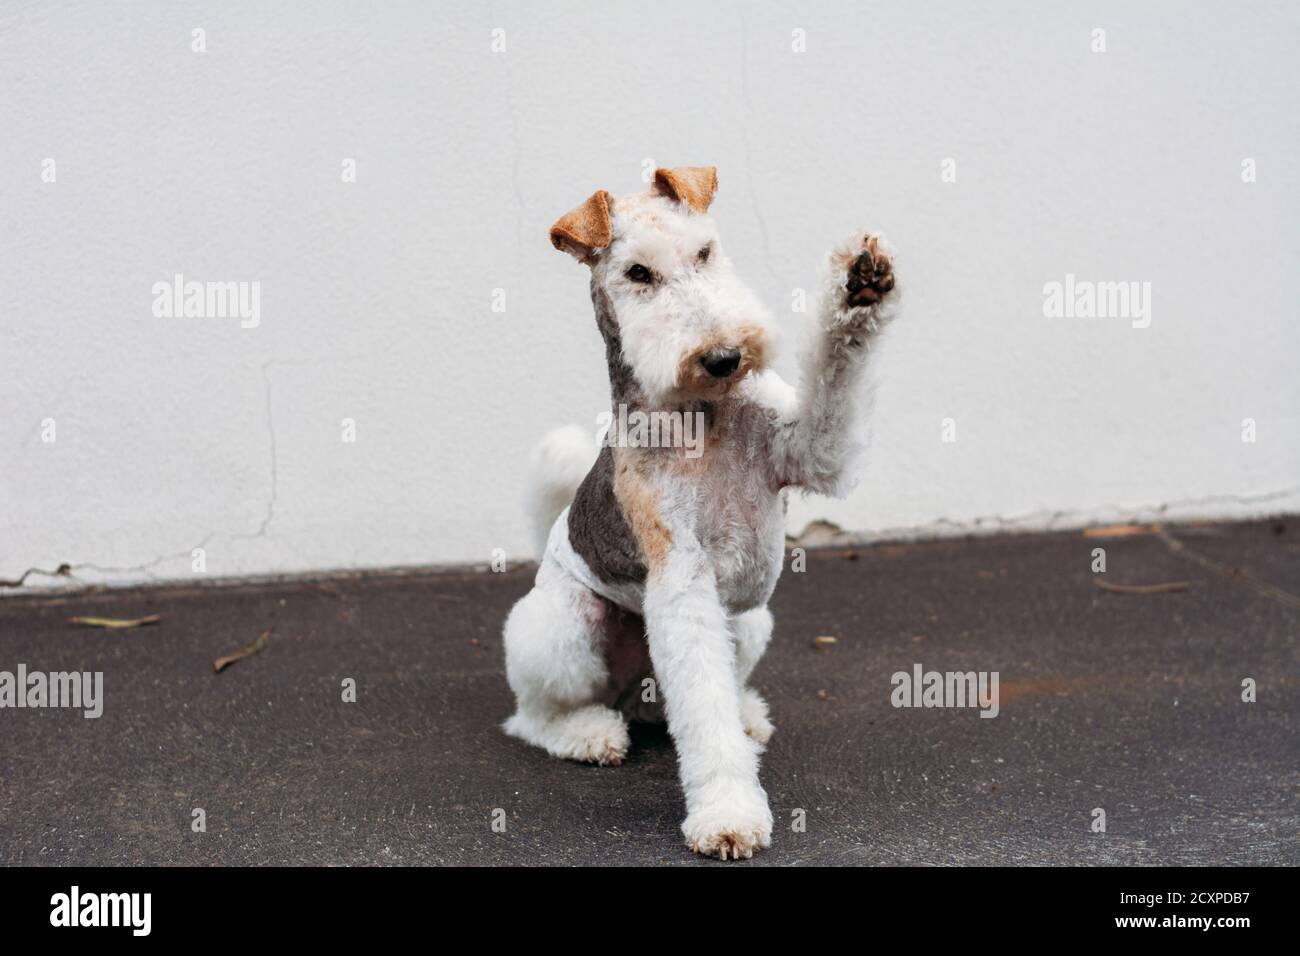 Wire Haired Fox Terrier raising paw to shake hands or high five Stock Photo